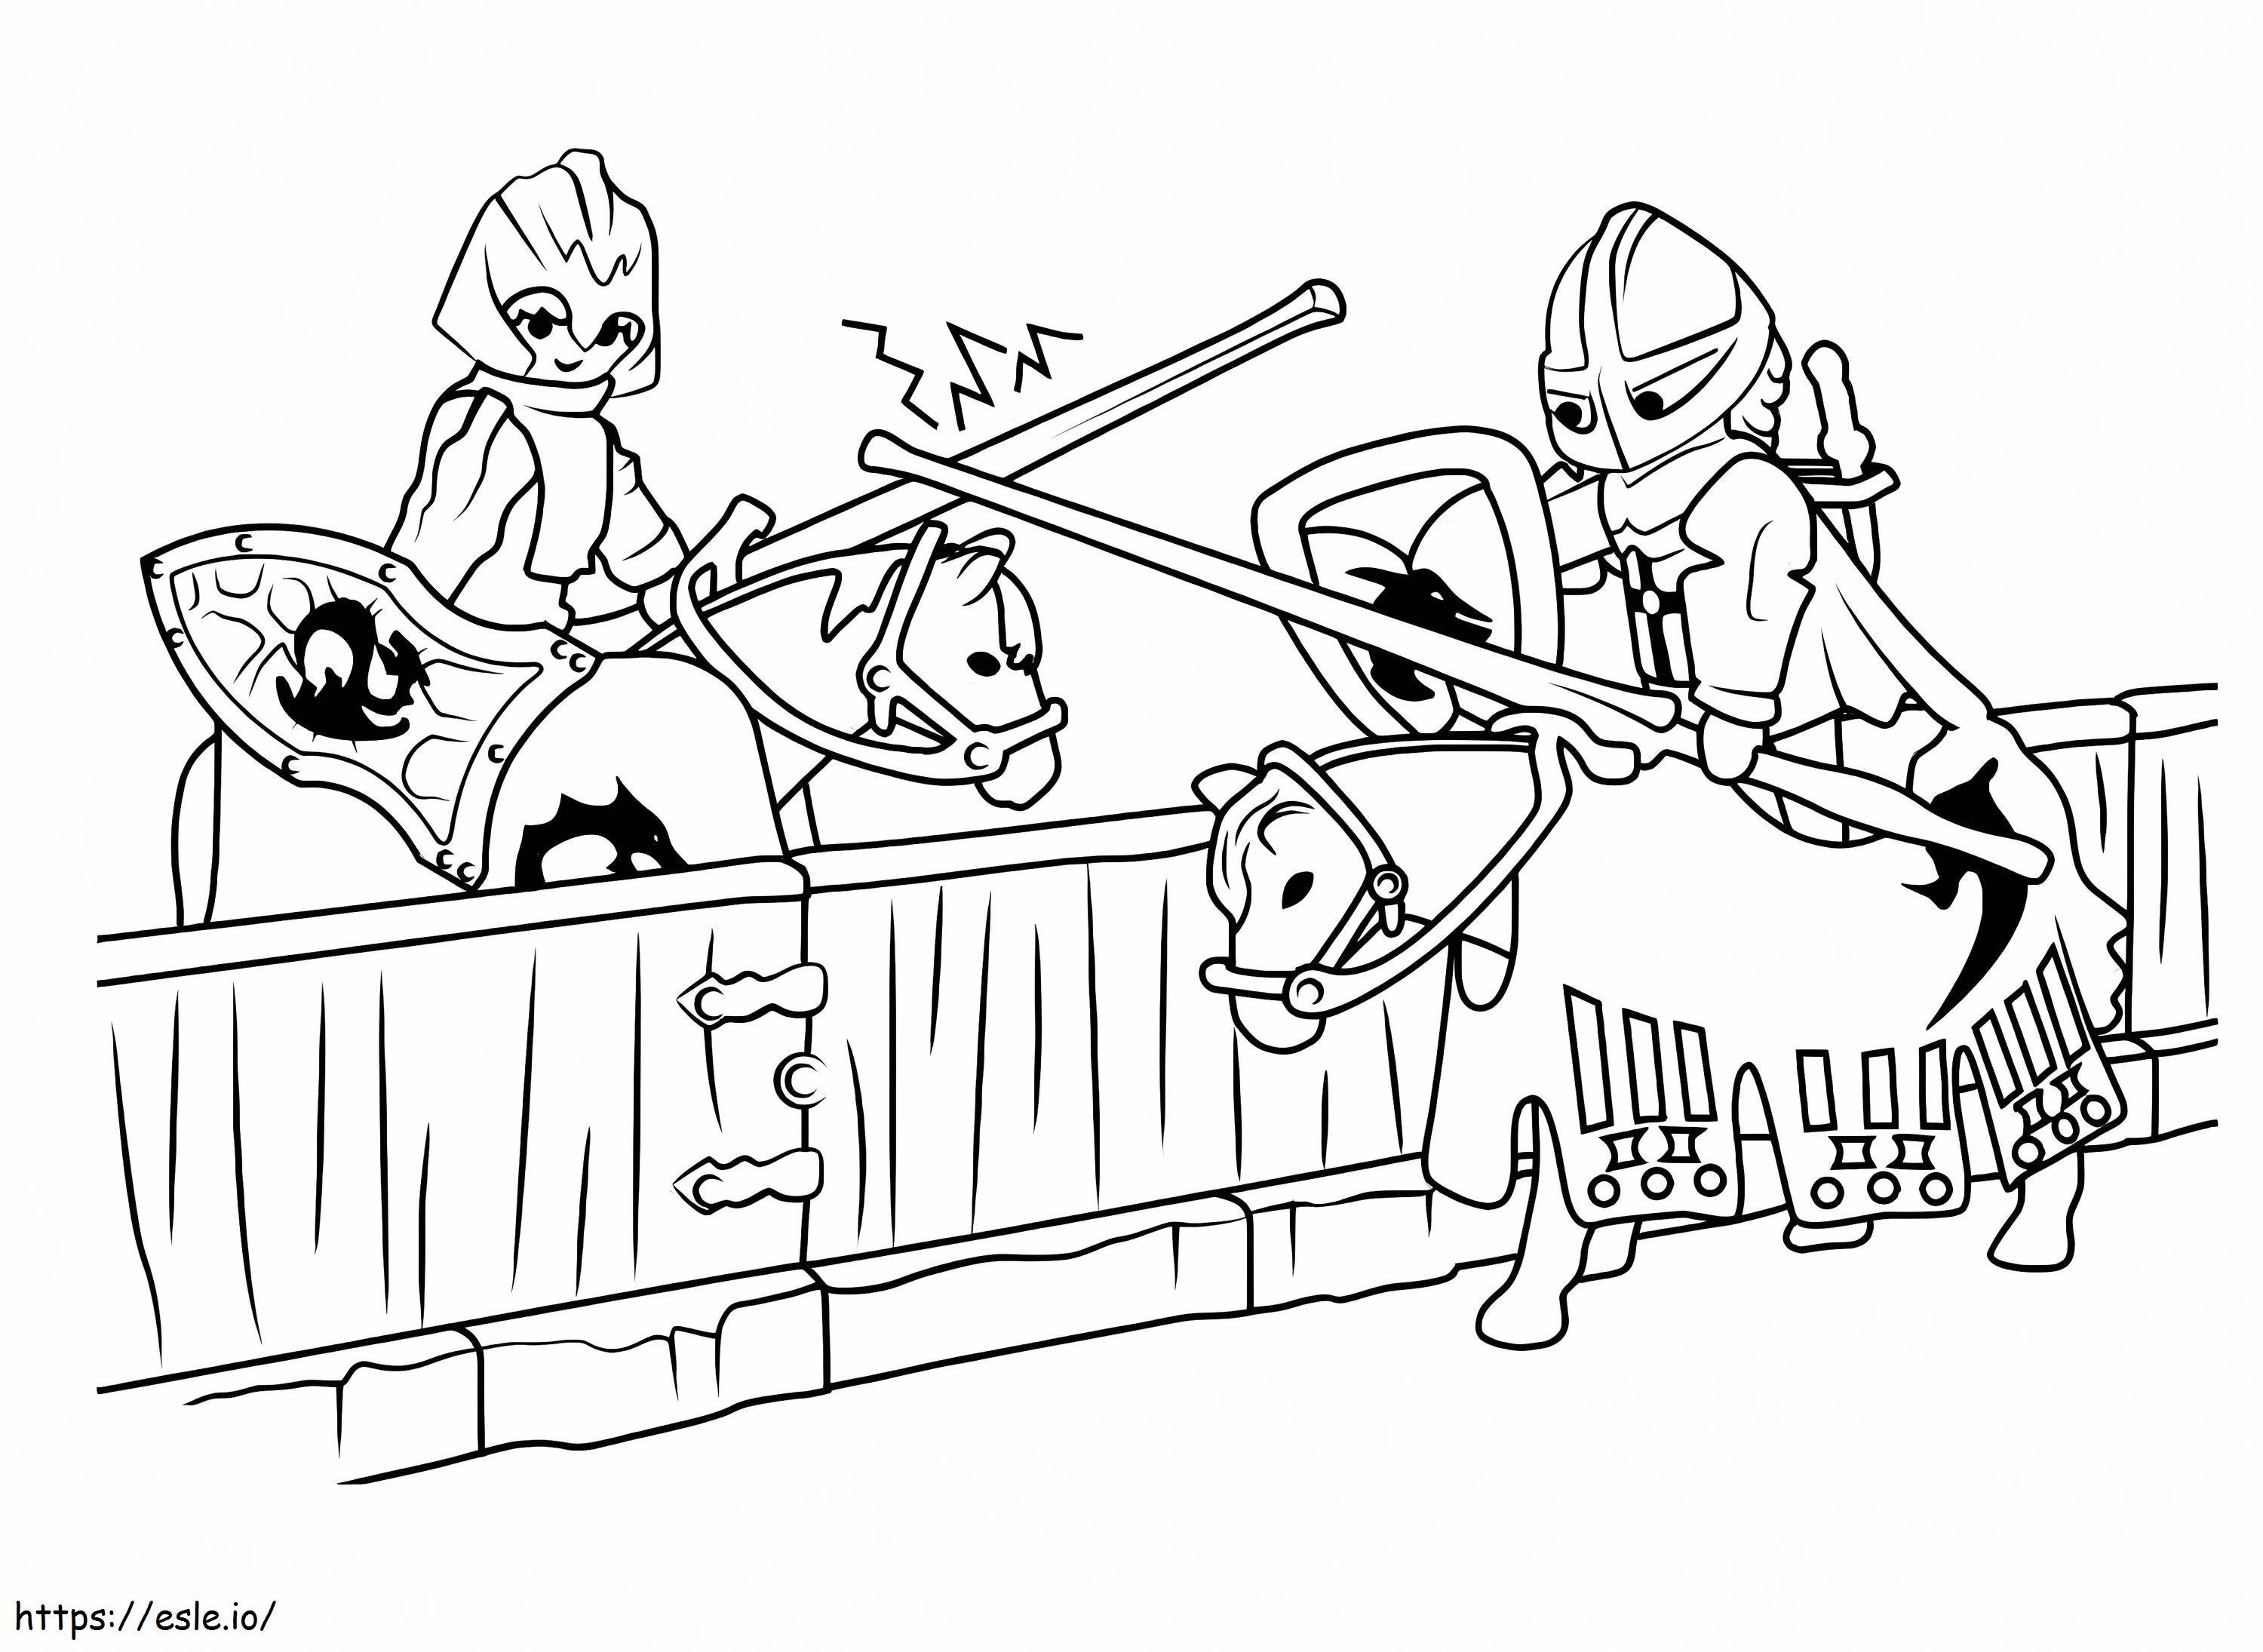 Playmobil 2 coloring page